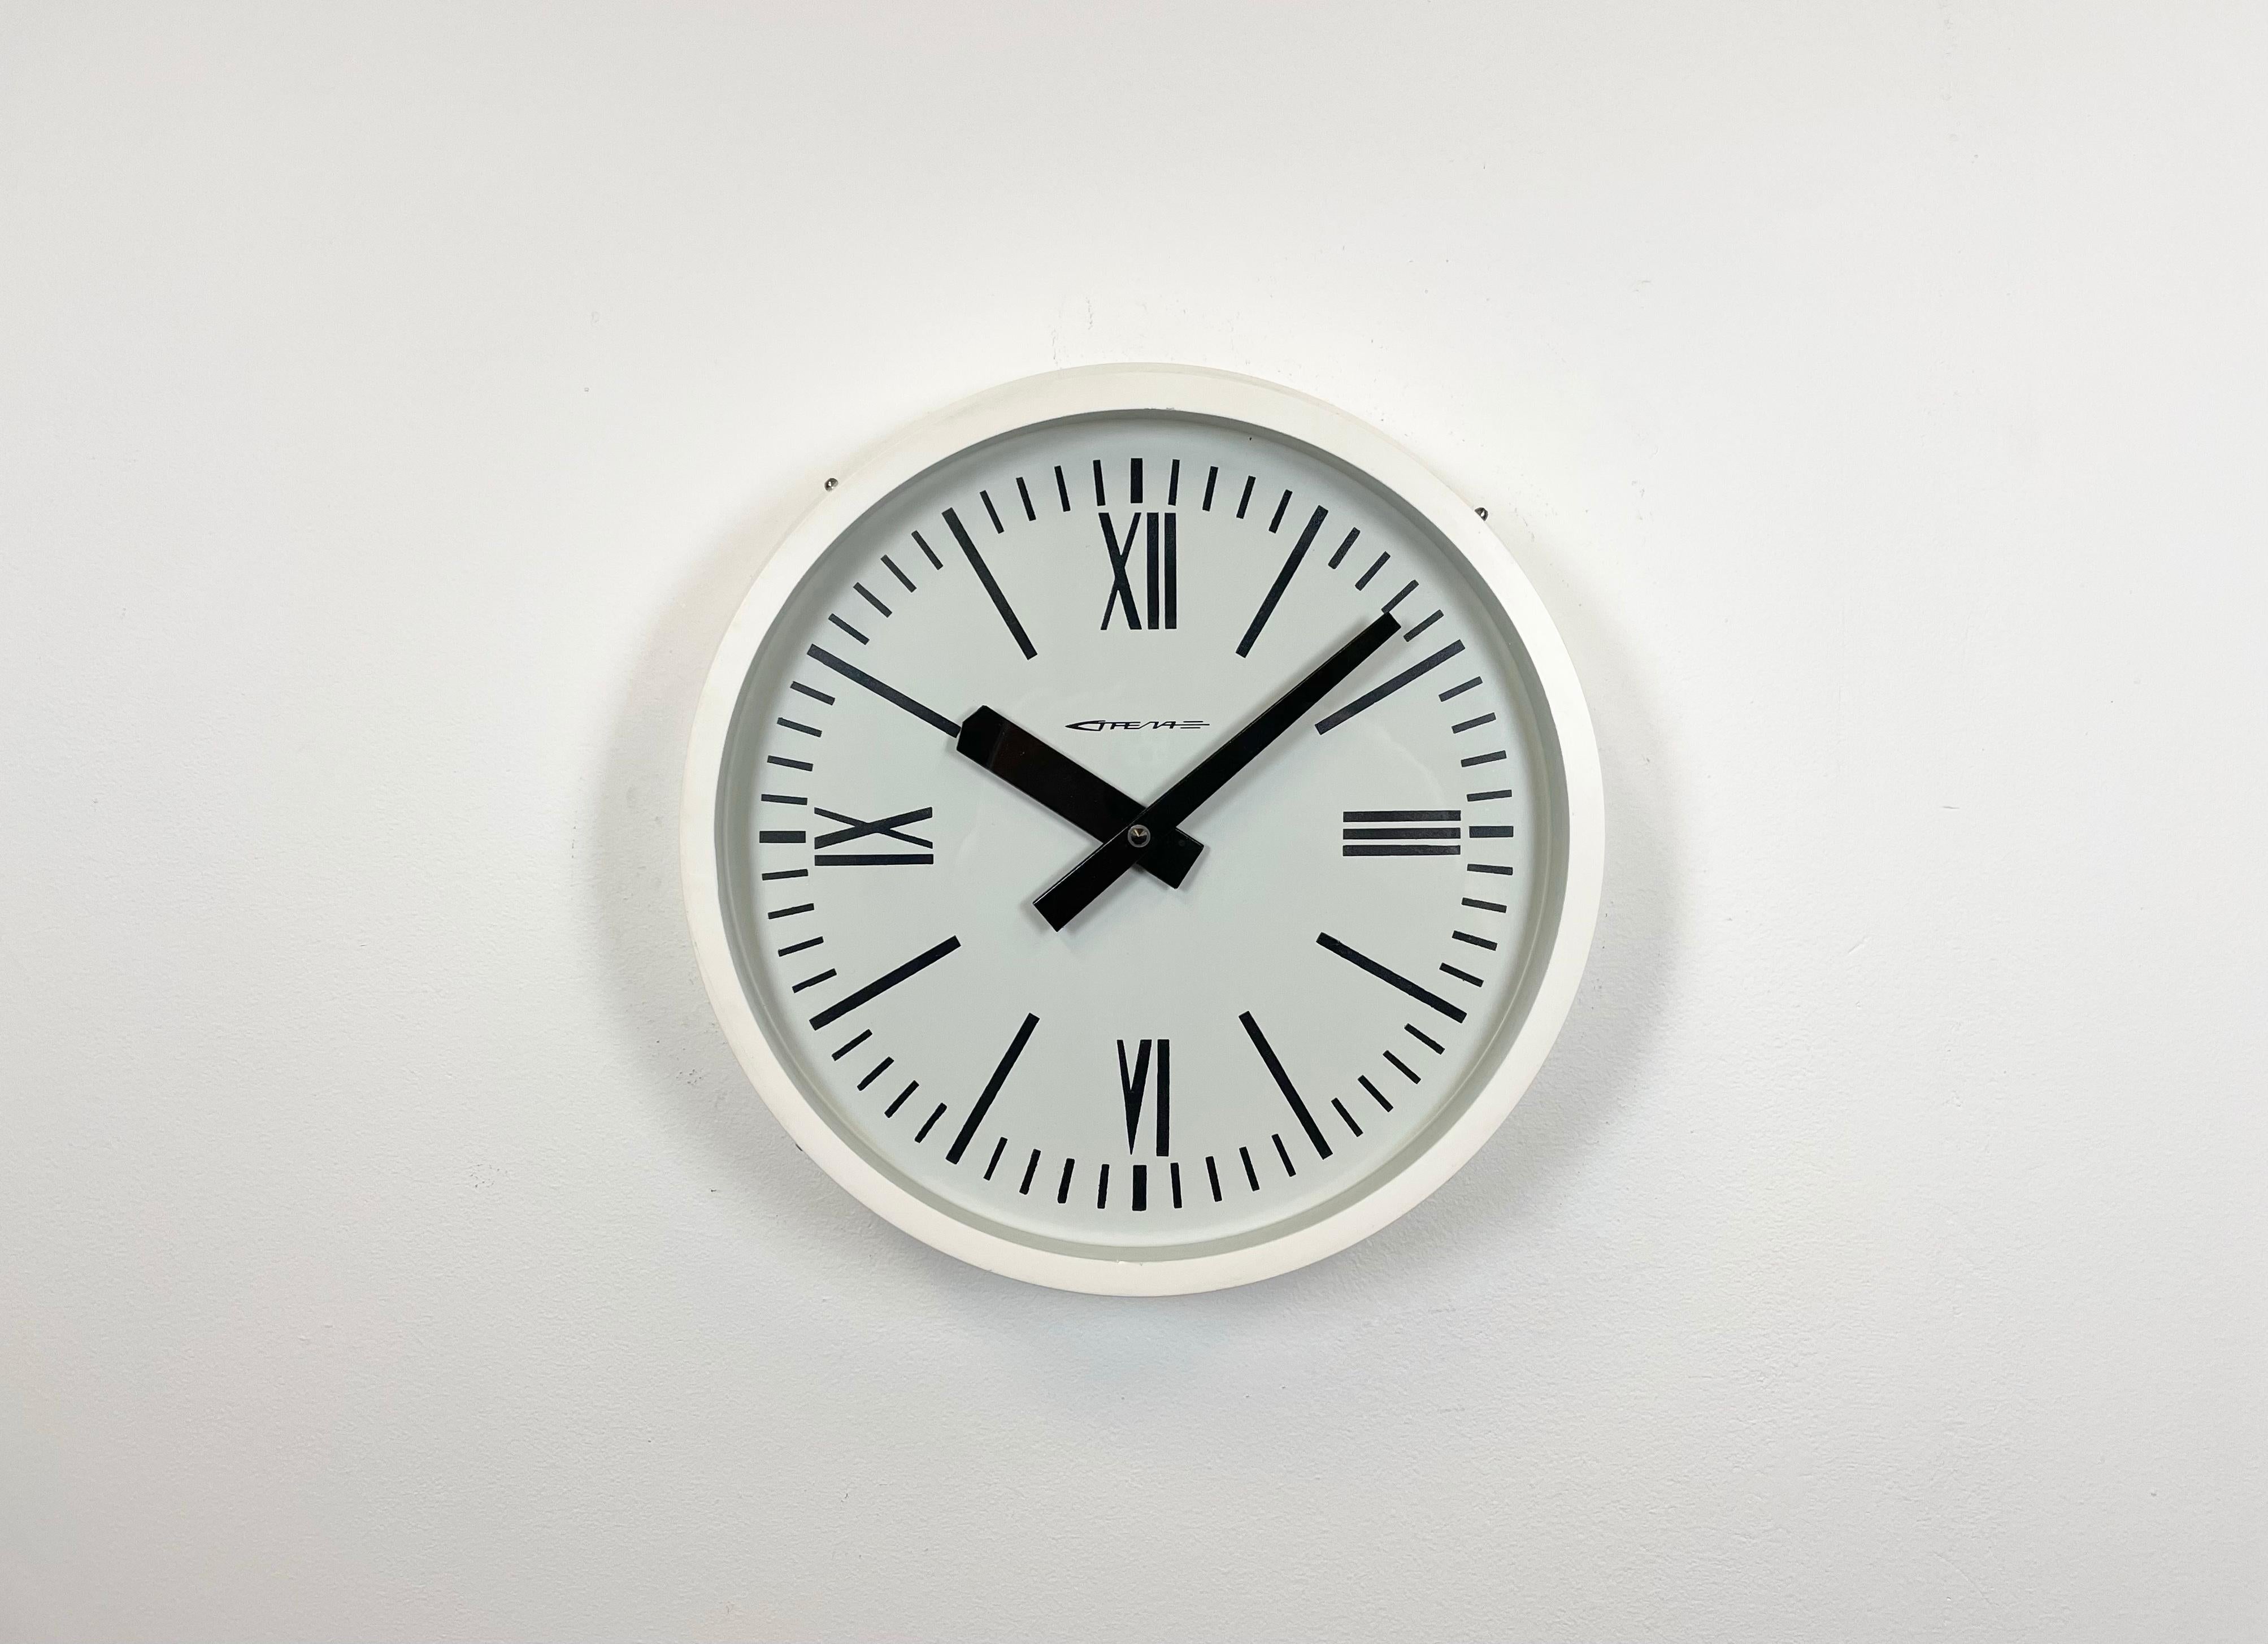 This wall clock was produced by Strela in former Soviet Union during the 1980s.It features a white bakelite frame, an iron dial and a clear glass cover. The piece has been converted into a battery-powered clockwork and requires only one AA-battery.